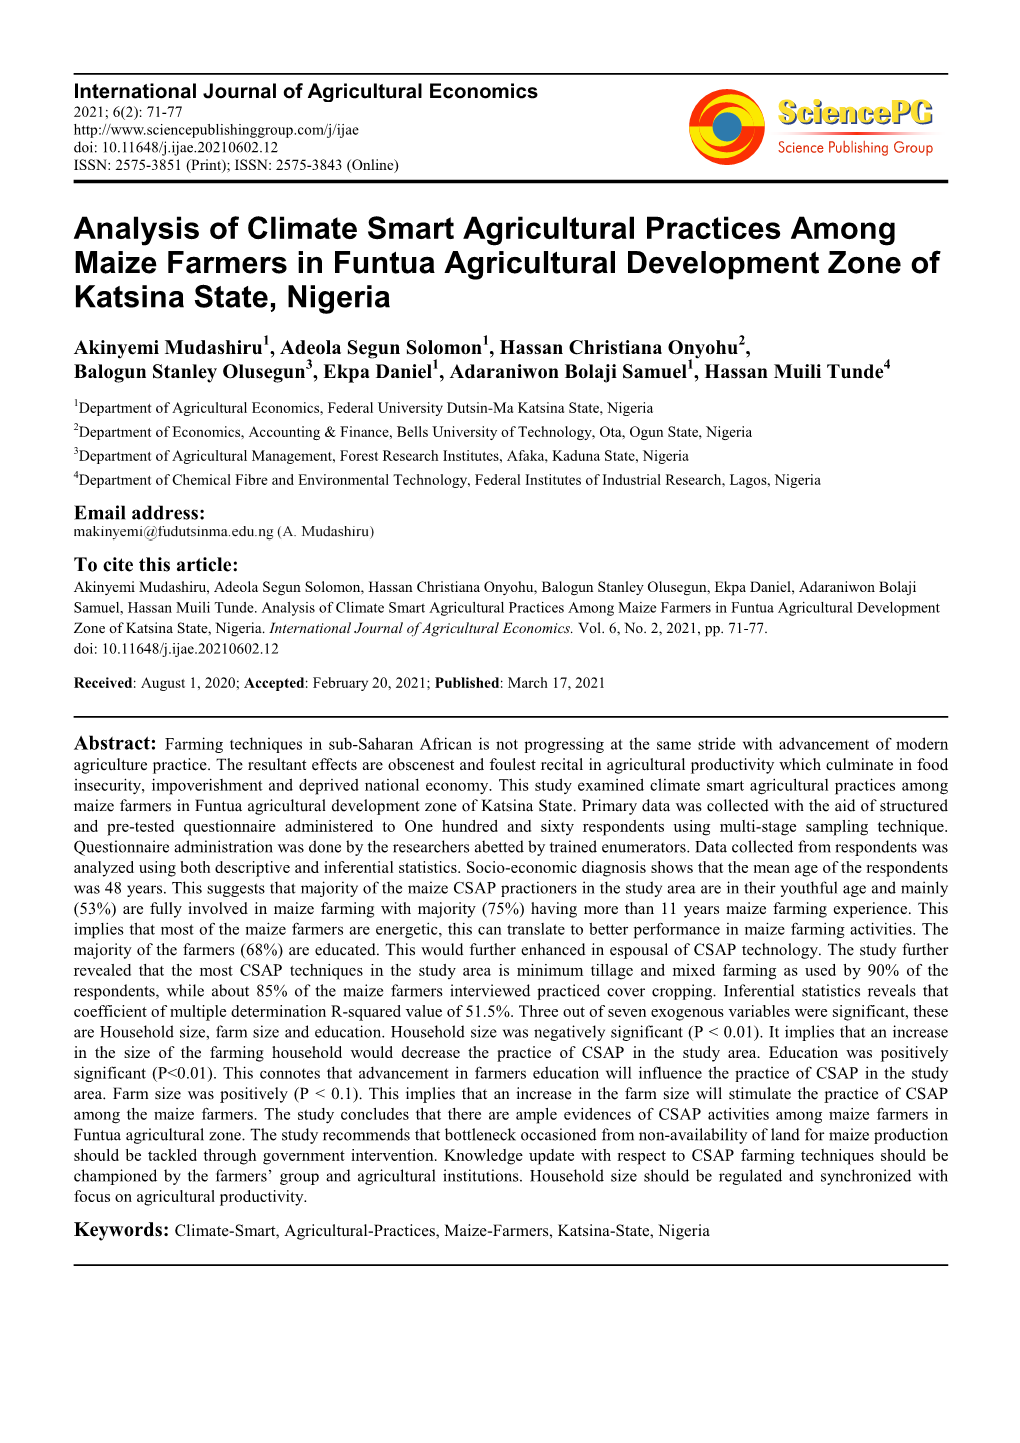 Analysis of Climate Smart Agricultural Practices Among Maize Farmers in Funtua Agricultural Development Zone of Katsina State, Nigeria